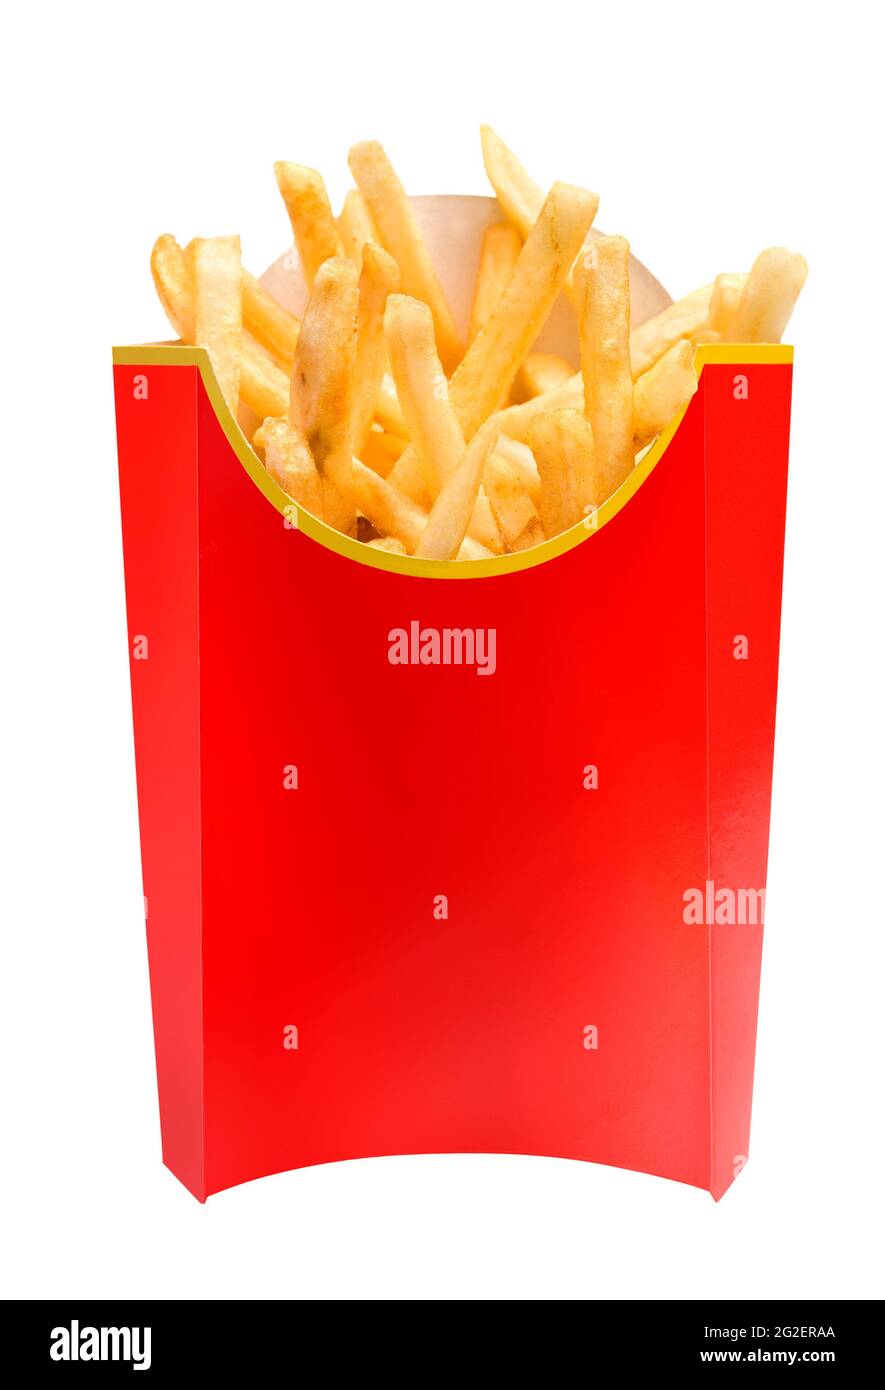 french fries in red cardboard container isolated on white Stock Photo